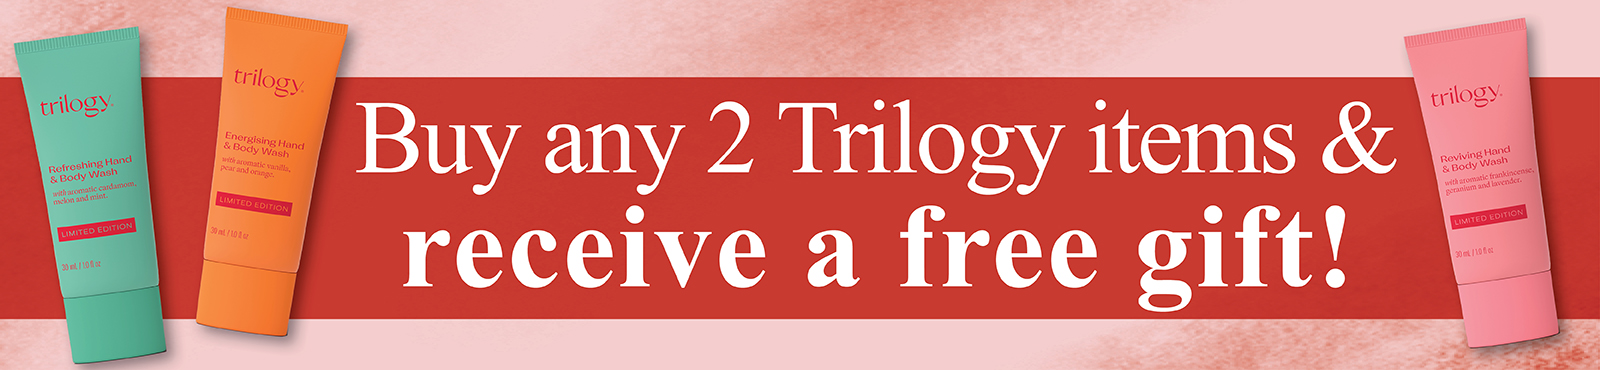 Trilogy Free Gift With Purchase